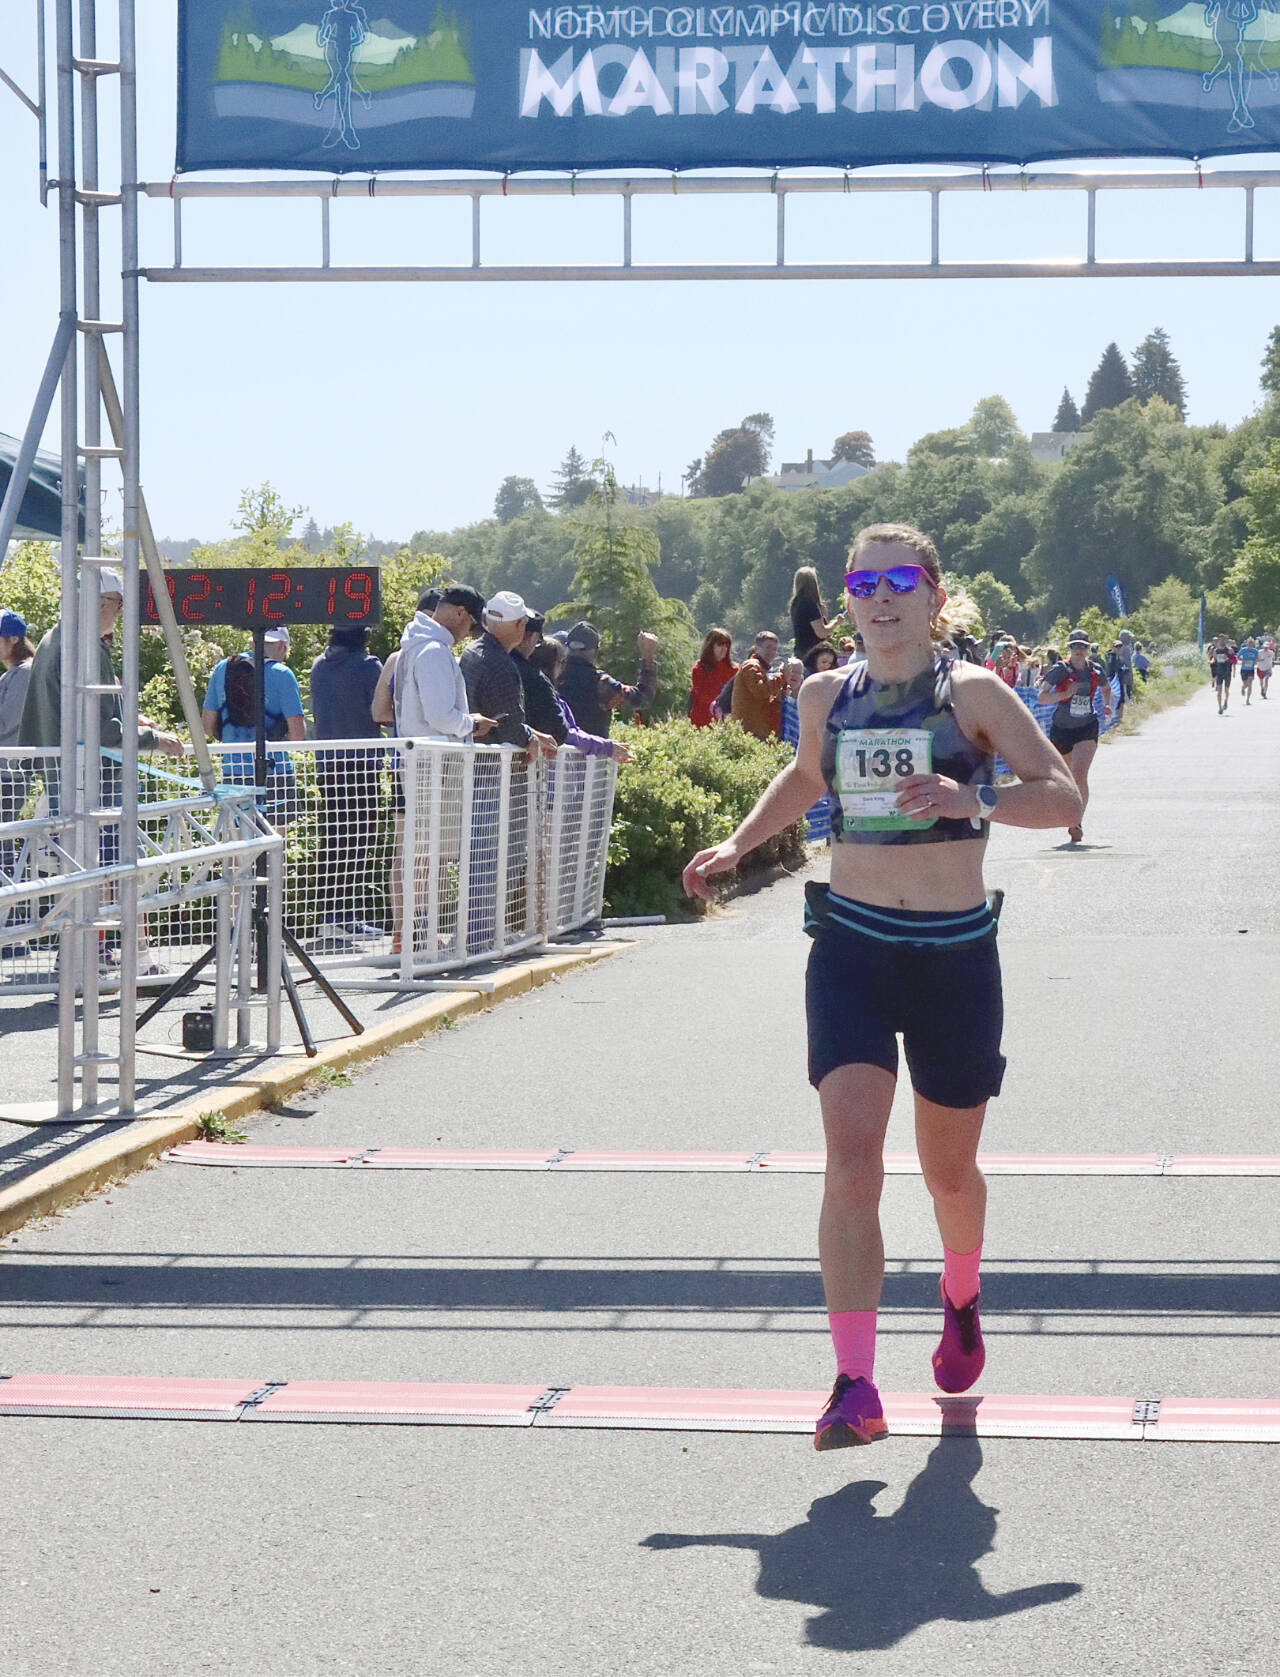 Sara King of Shoreline crosses the finish line of the North Olympic Discovery Marathon as the women’s winner in a time of 3:12:19.57, winning the women’s division by 17 minutes. (Dave Logan/for Peninsula Daily News)